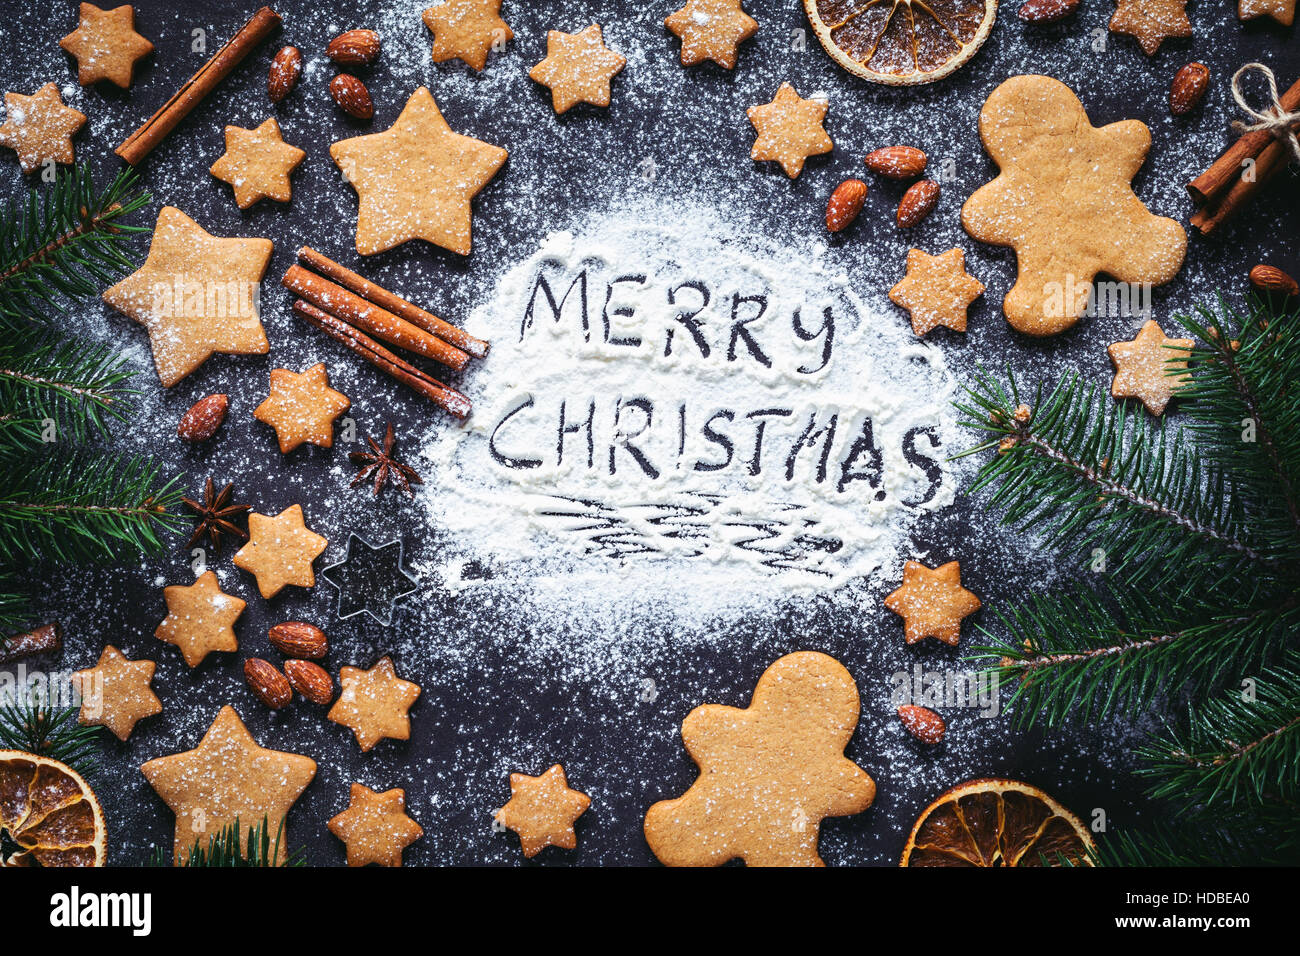 Merry Christmas greeting written on flour on blackboard. Frame with gingerbread cookies, gingerbread man cookies and spices Stock Photo